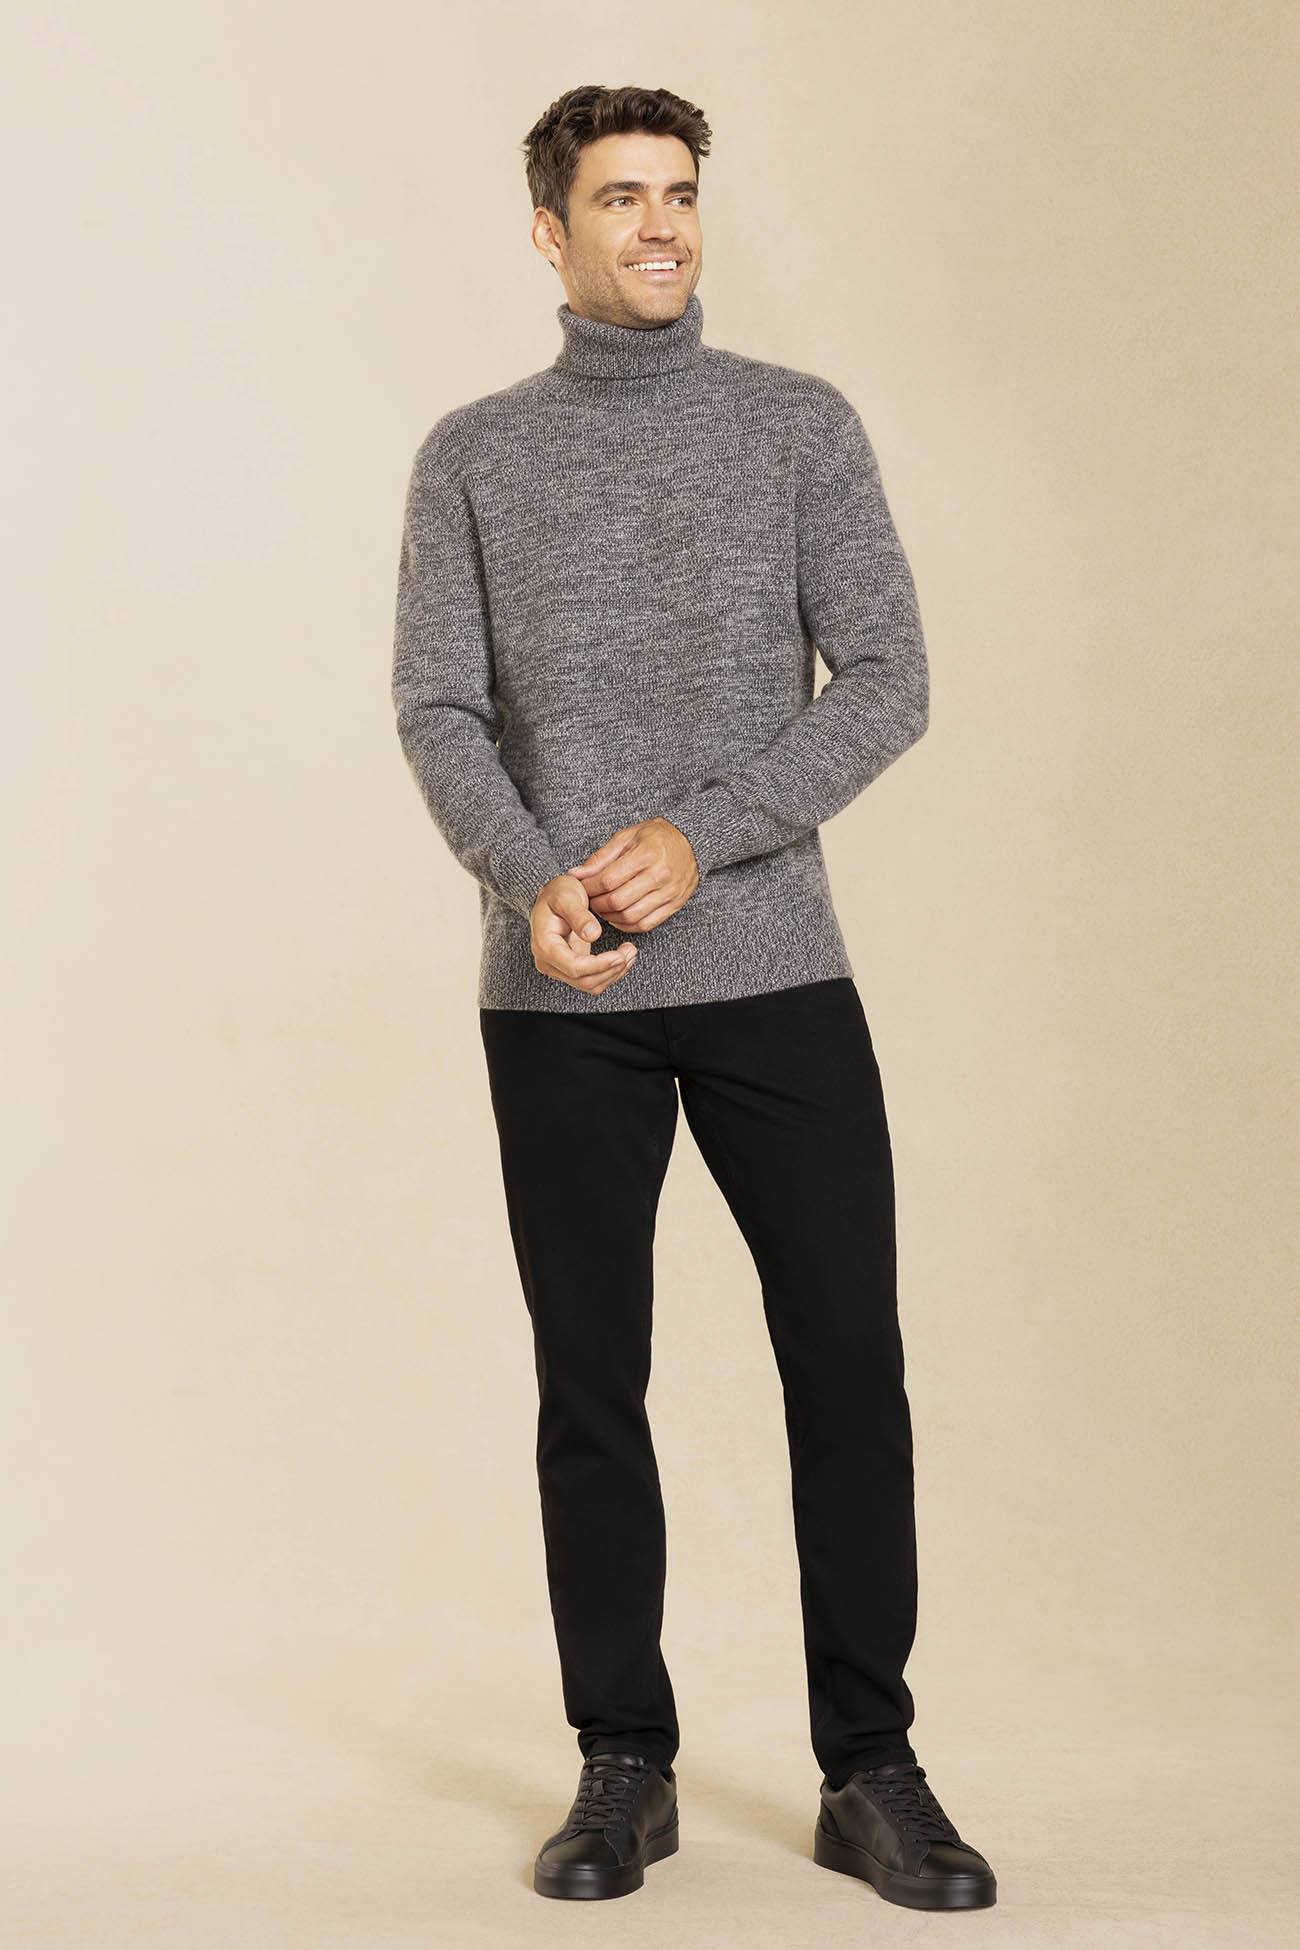 Cashmere outfits for men